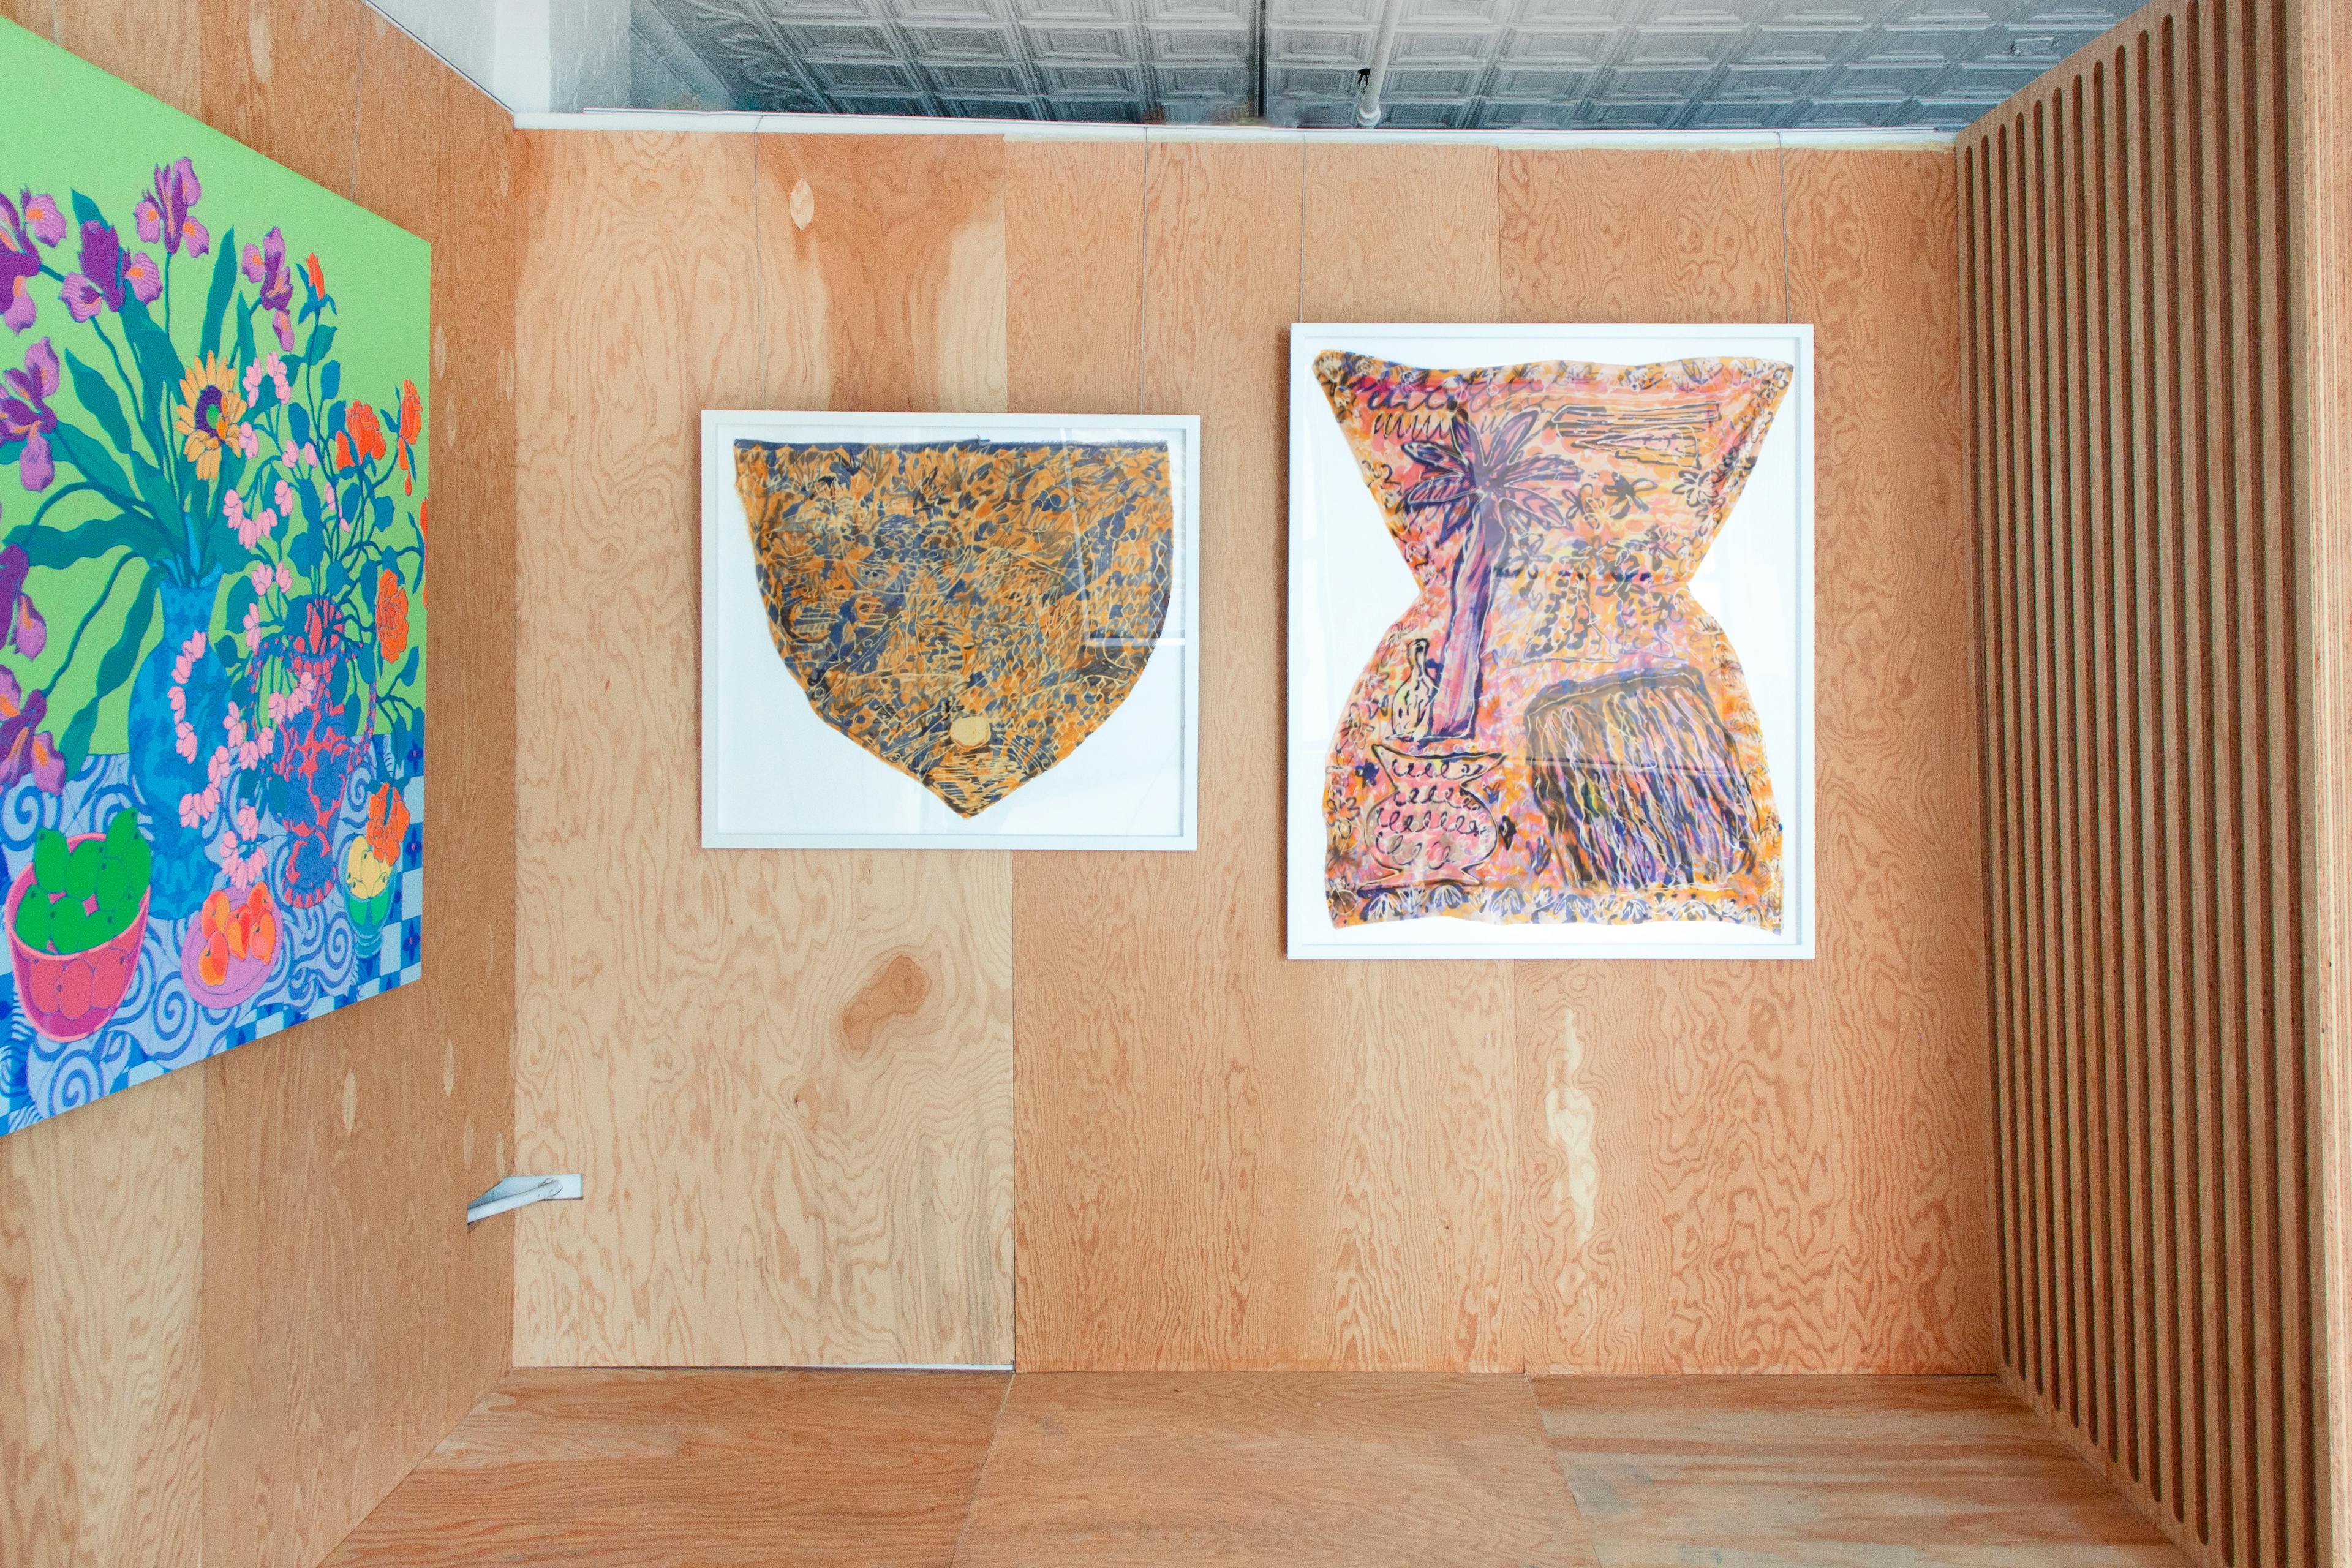 Artwork by Sarah Ingraham and Padma Rajendran in the exhibition Over Order.